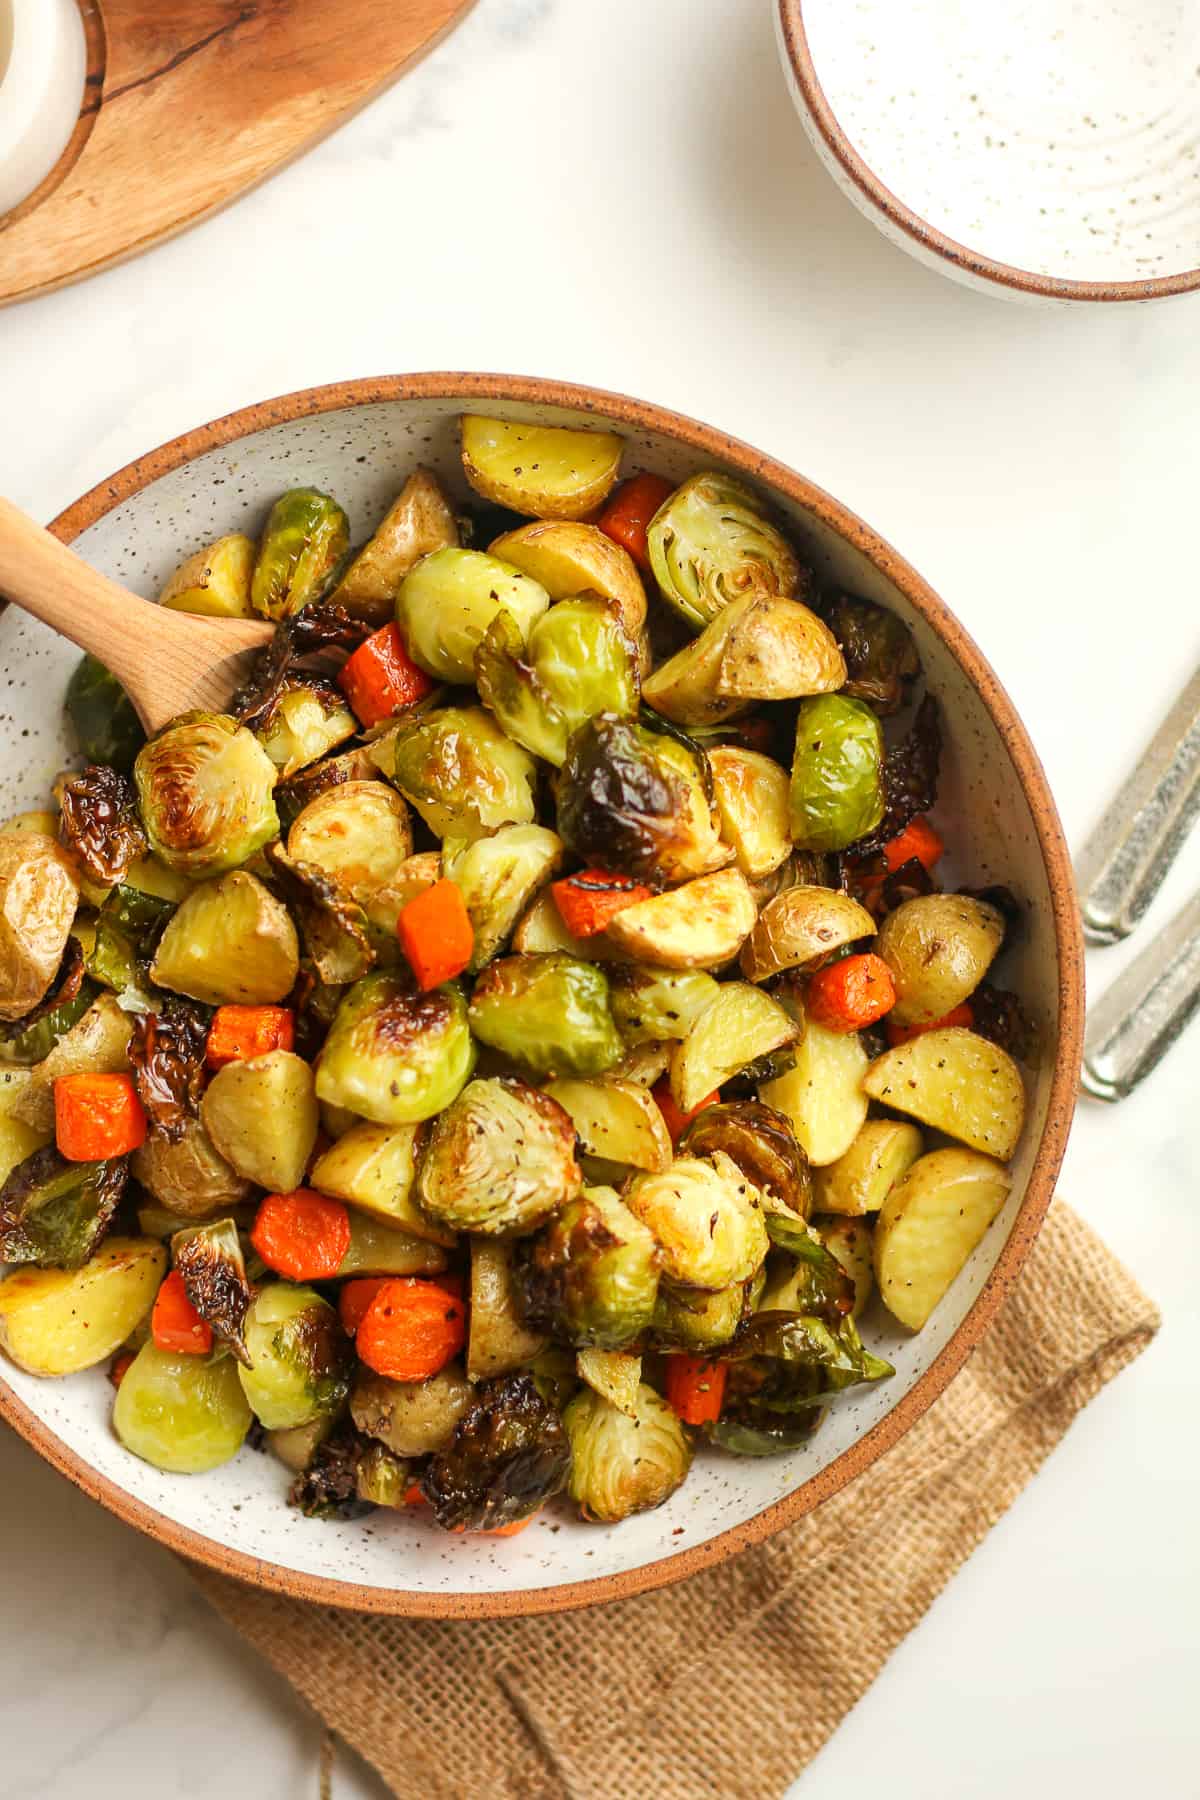 A partial view of a bowl of roasted veggies.